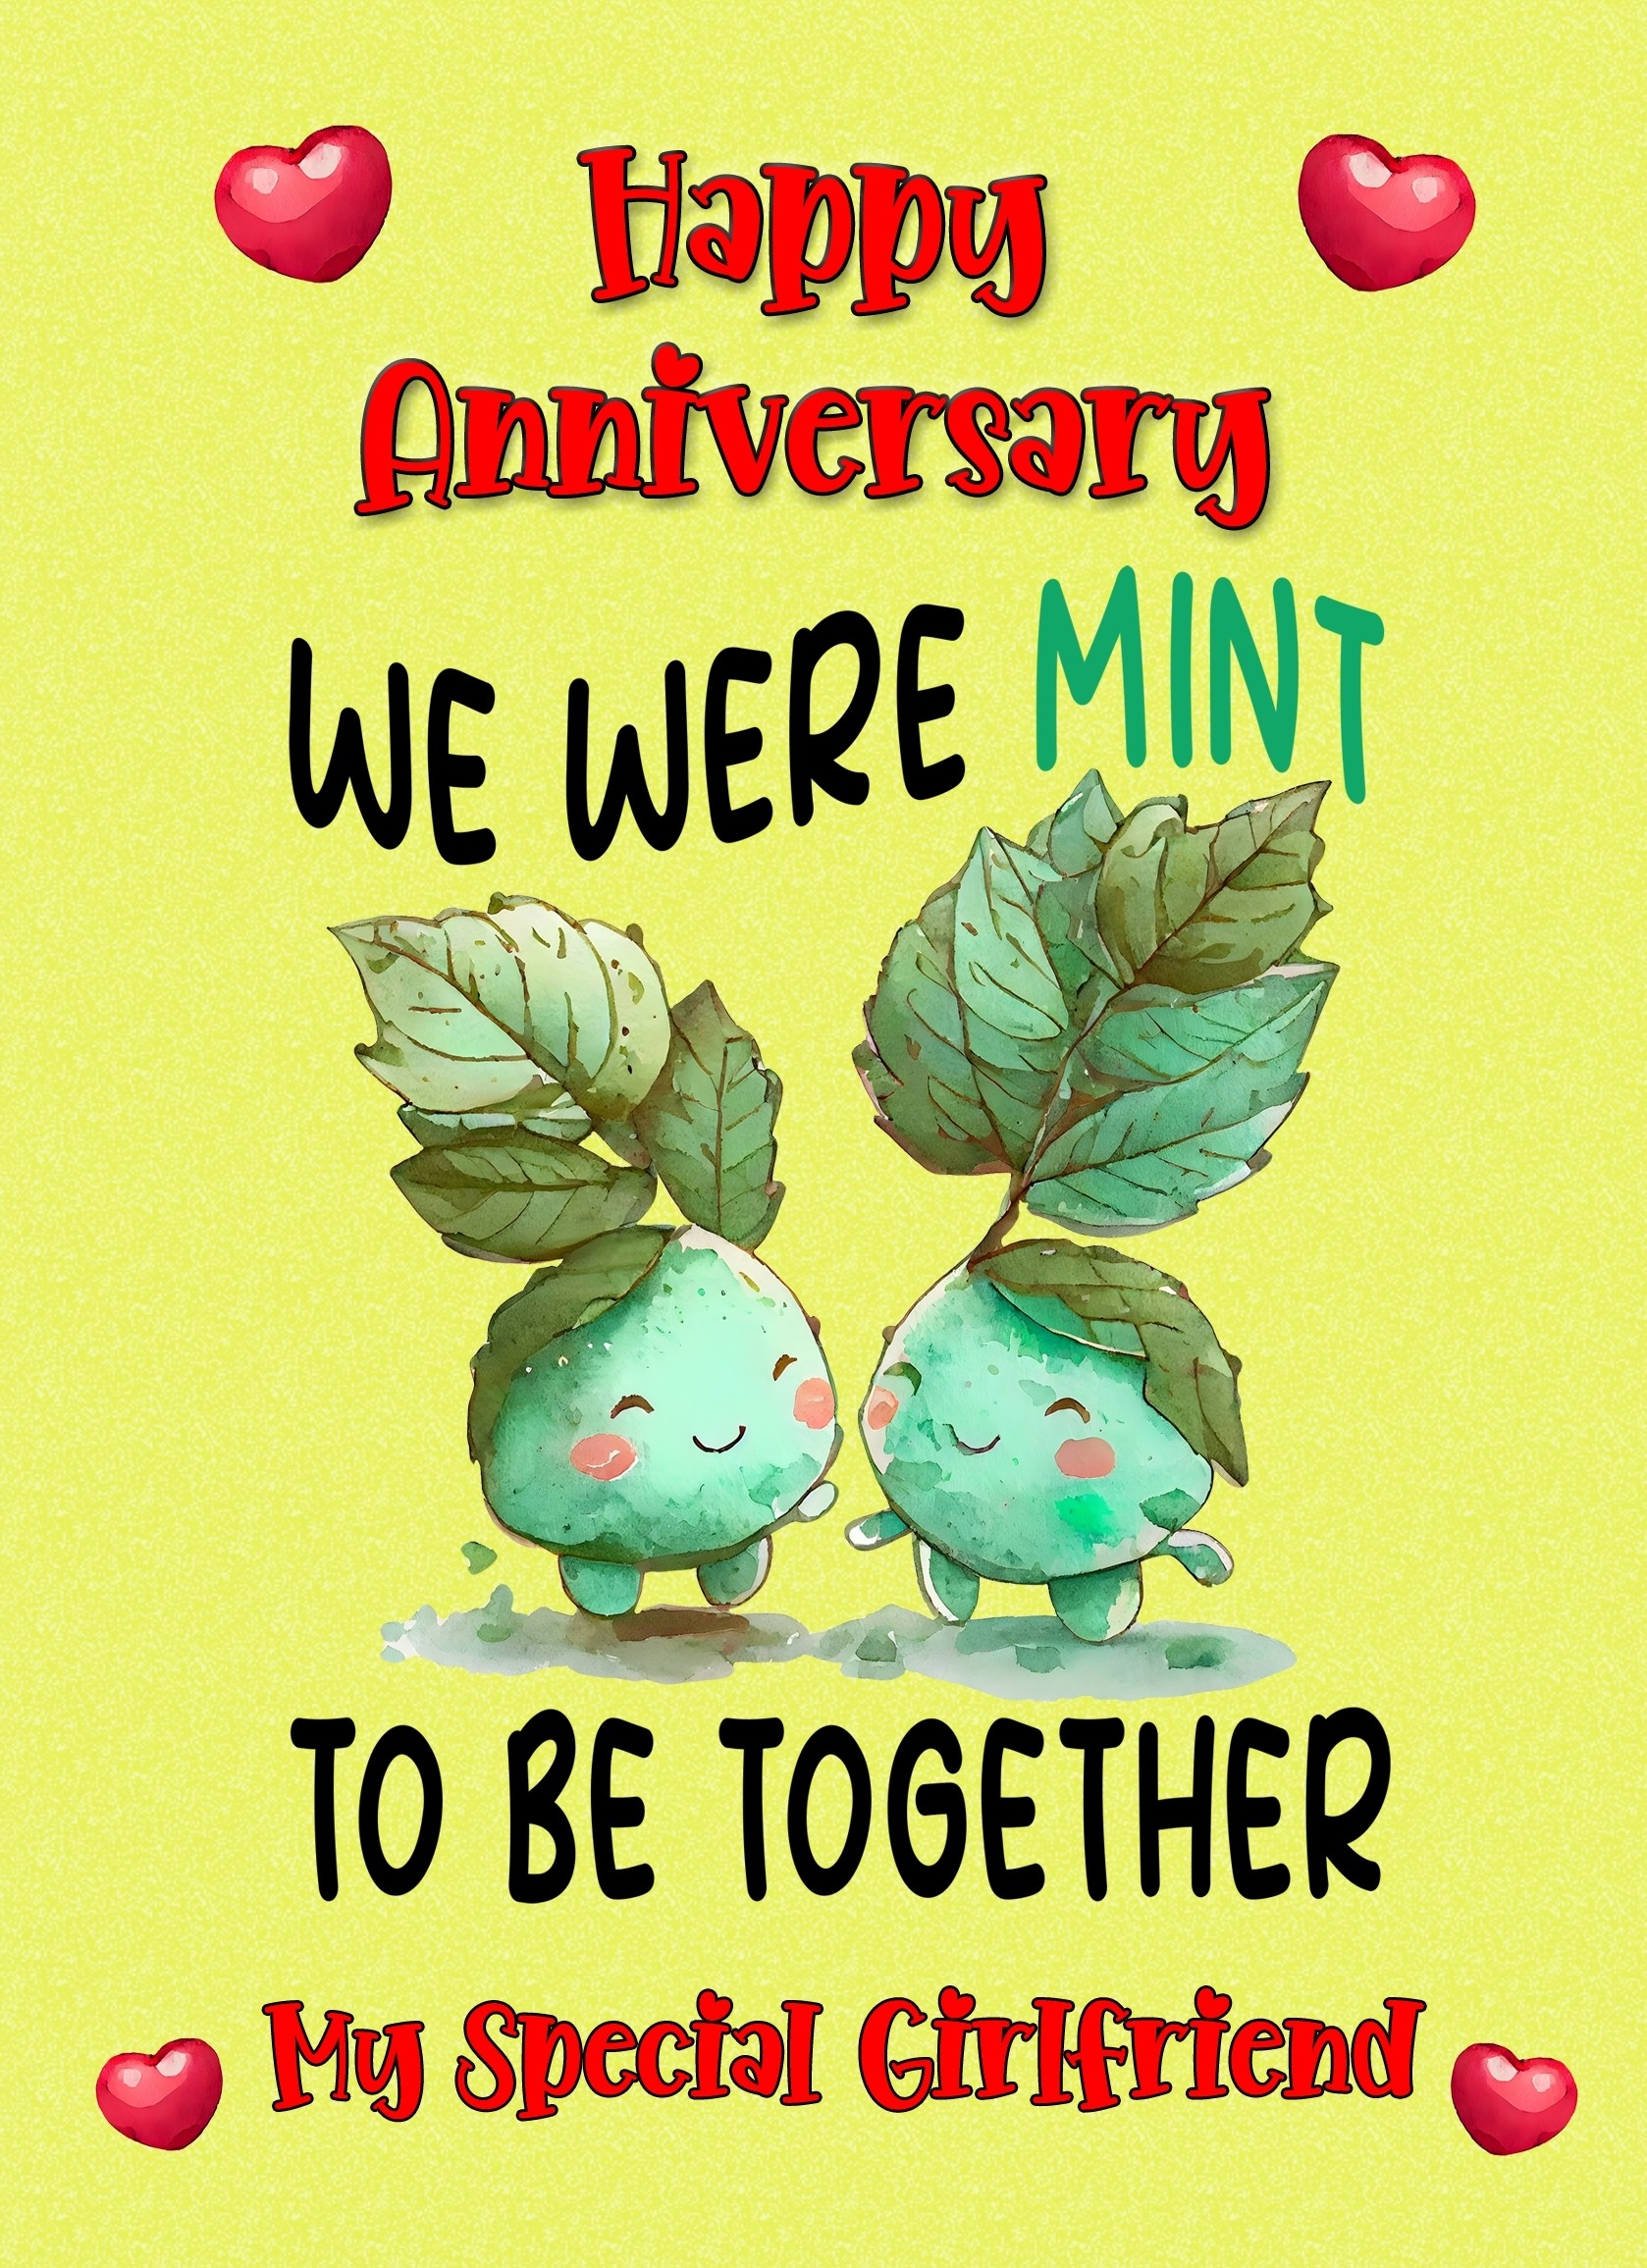 Funny Pun Romantic Anniversary Card for Girlfriend (Mint to Be)